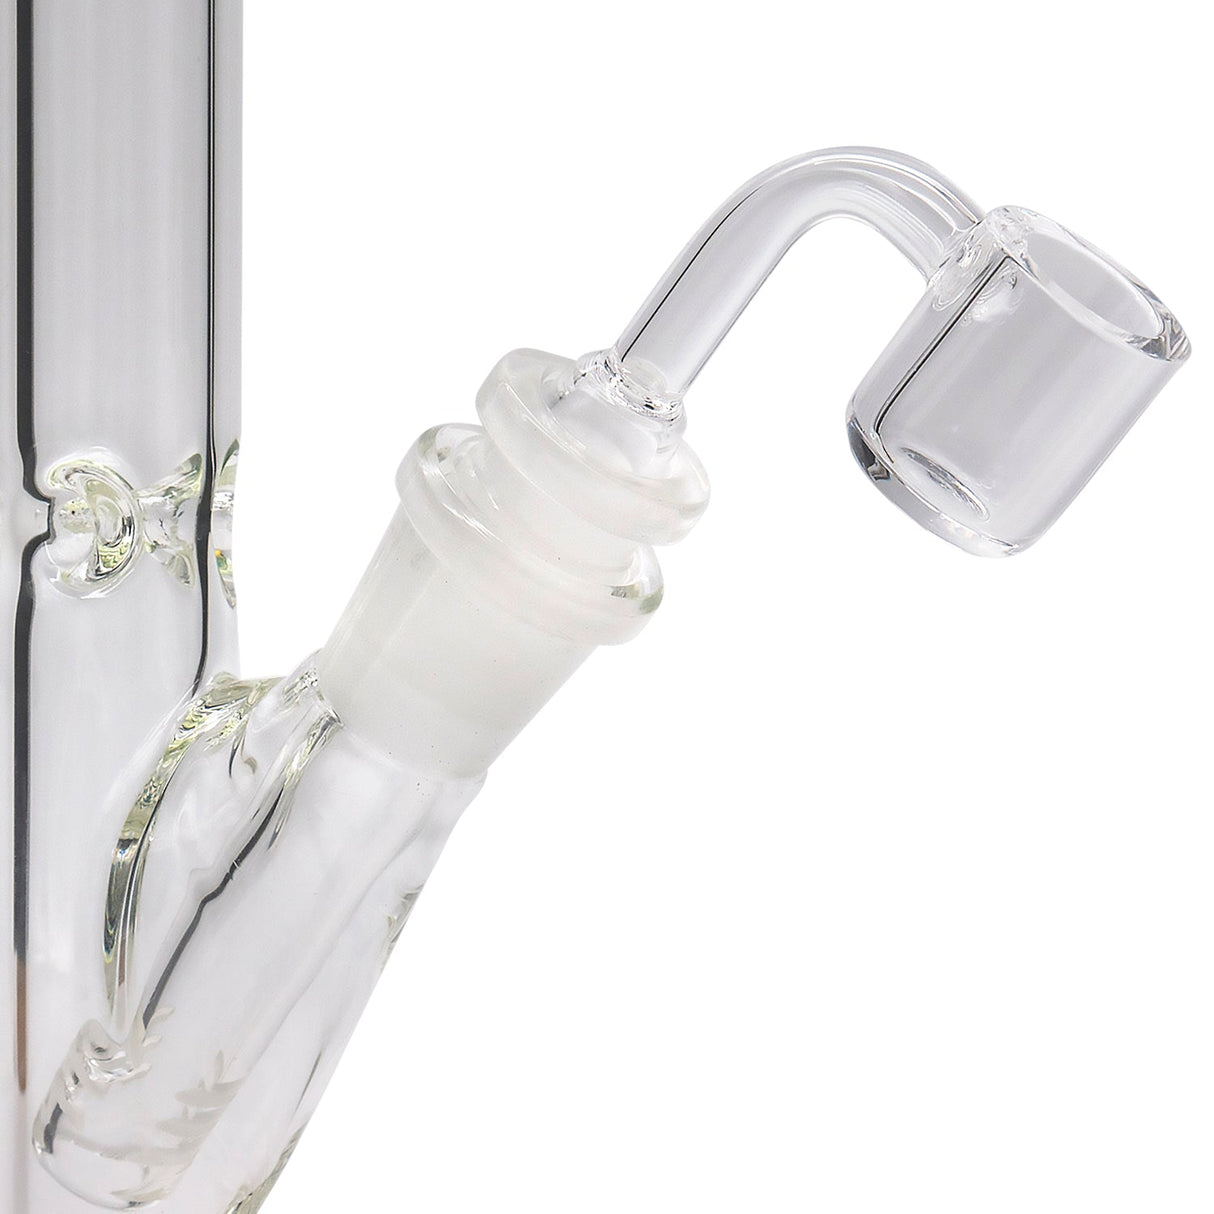 Close-up of LA Pipes 14" Slim Straight Glass Waterpipe showing the 45-degree female joint